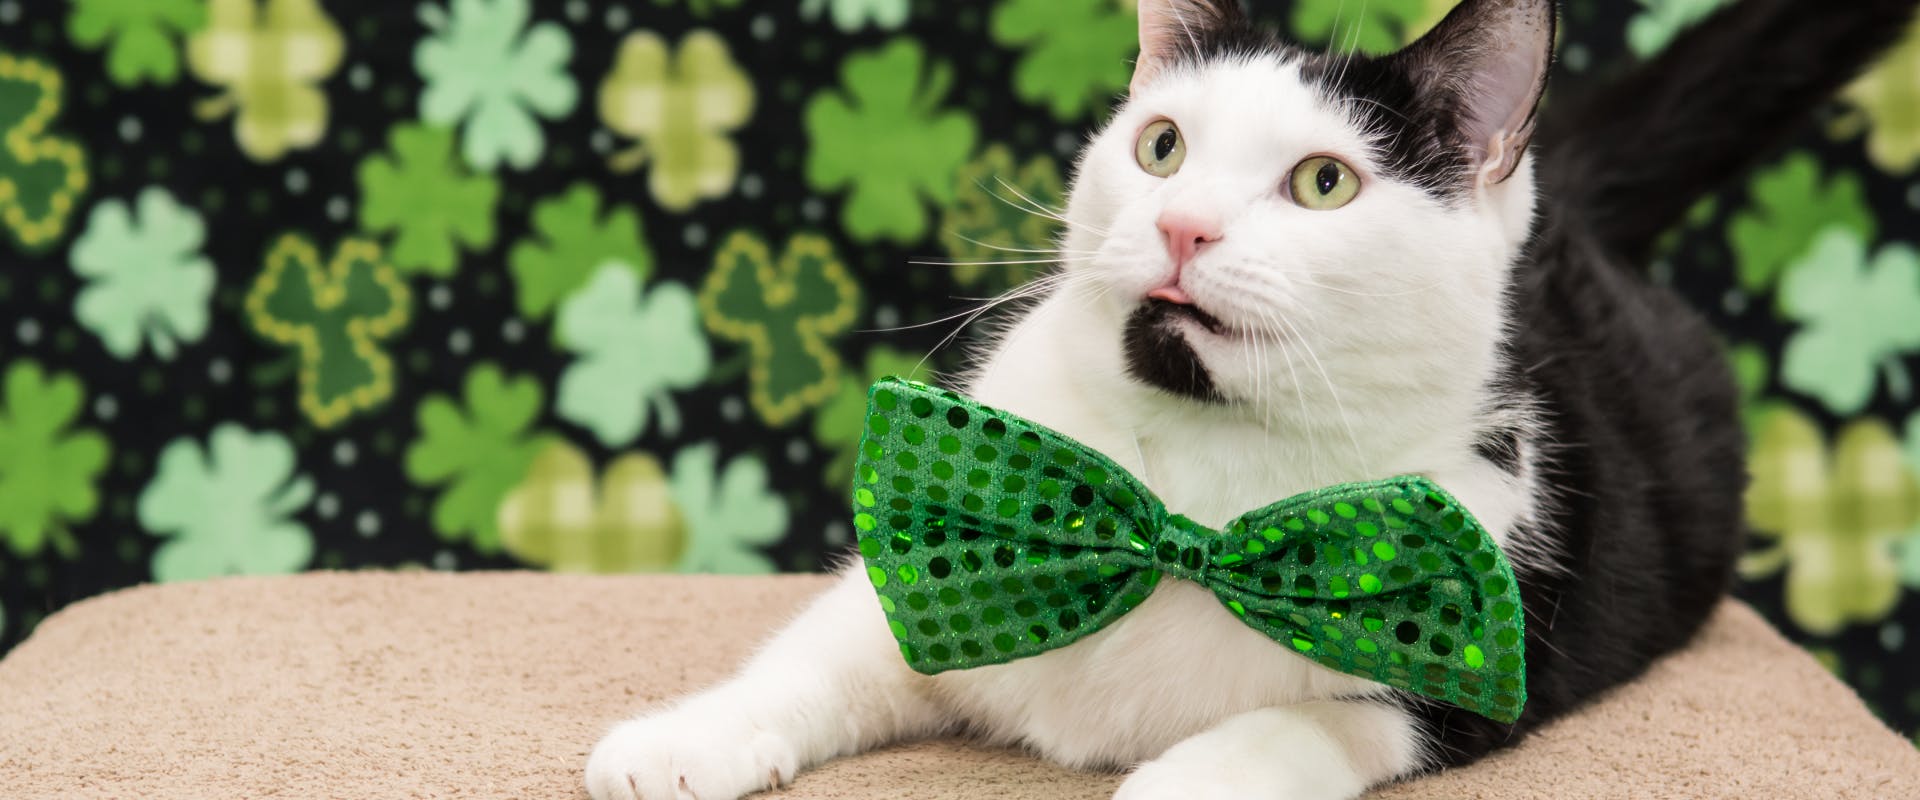 black and white cat wearing a green and sparkly bow tie